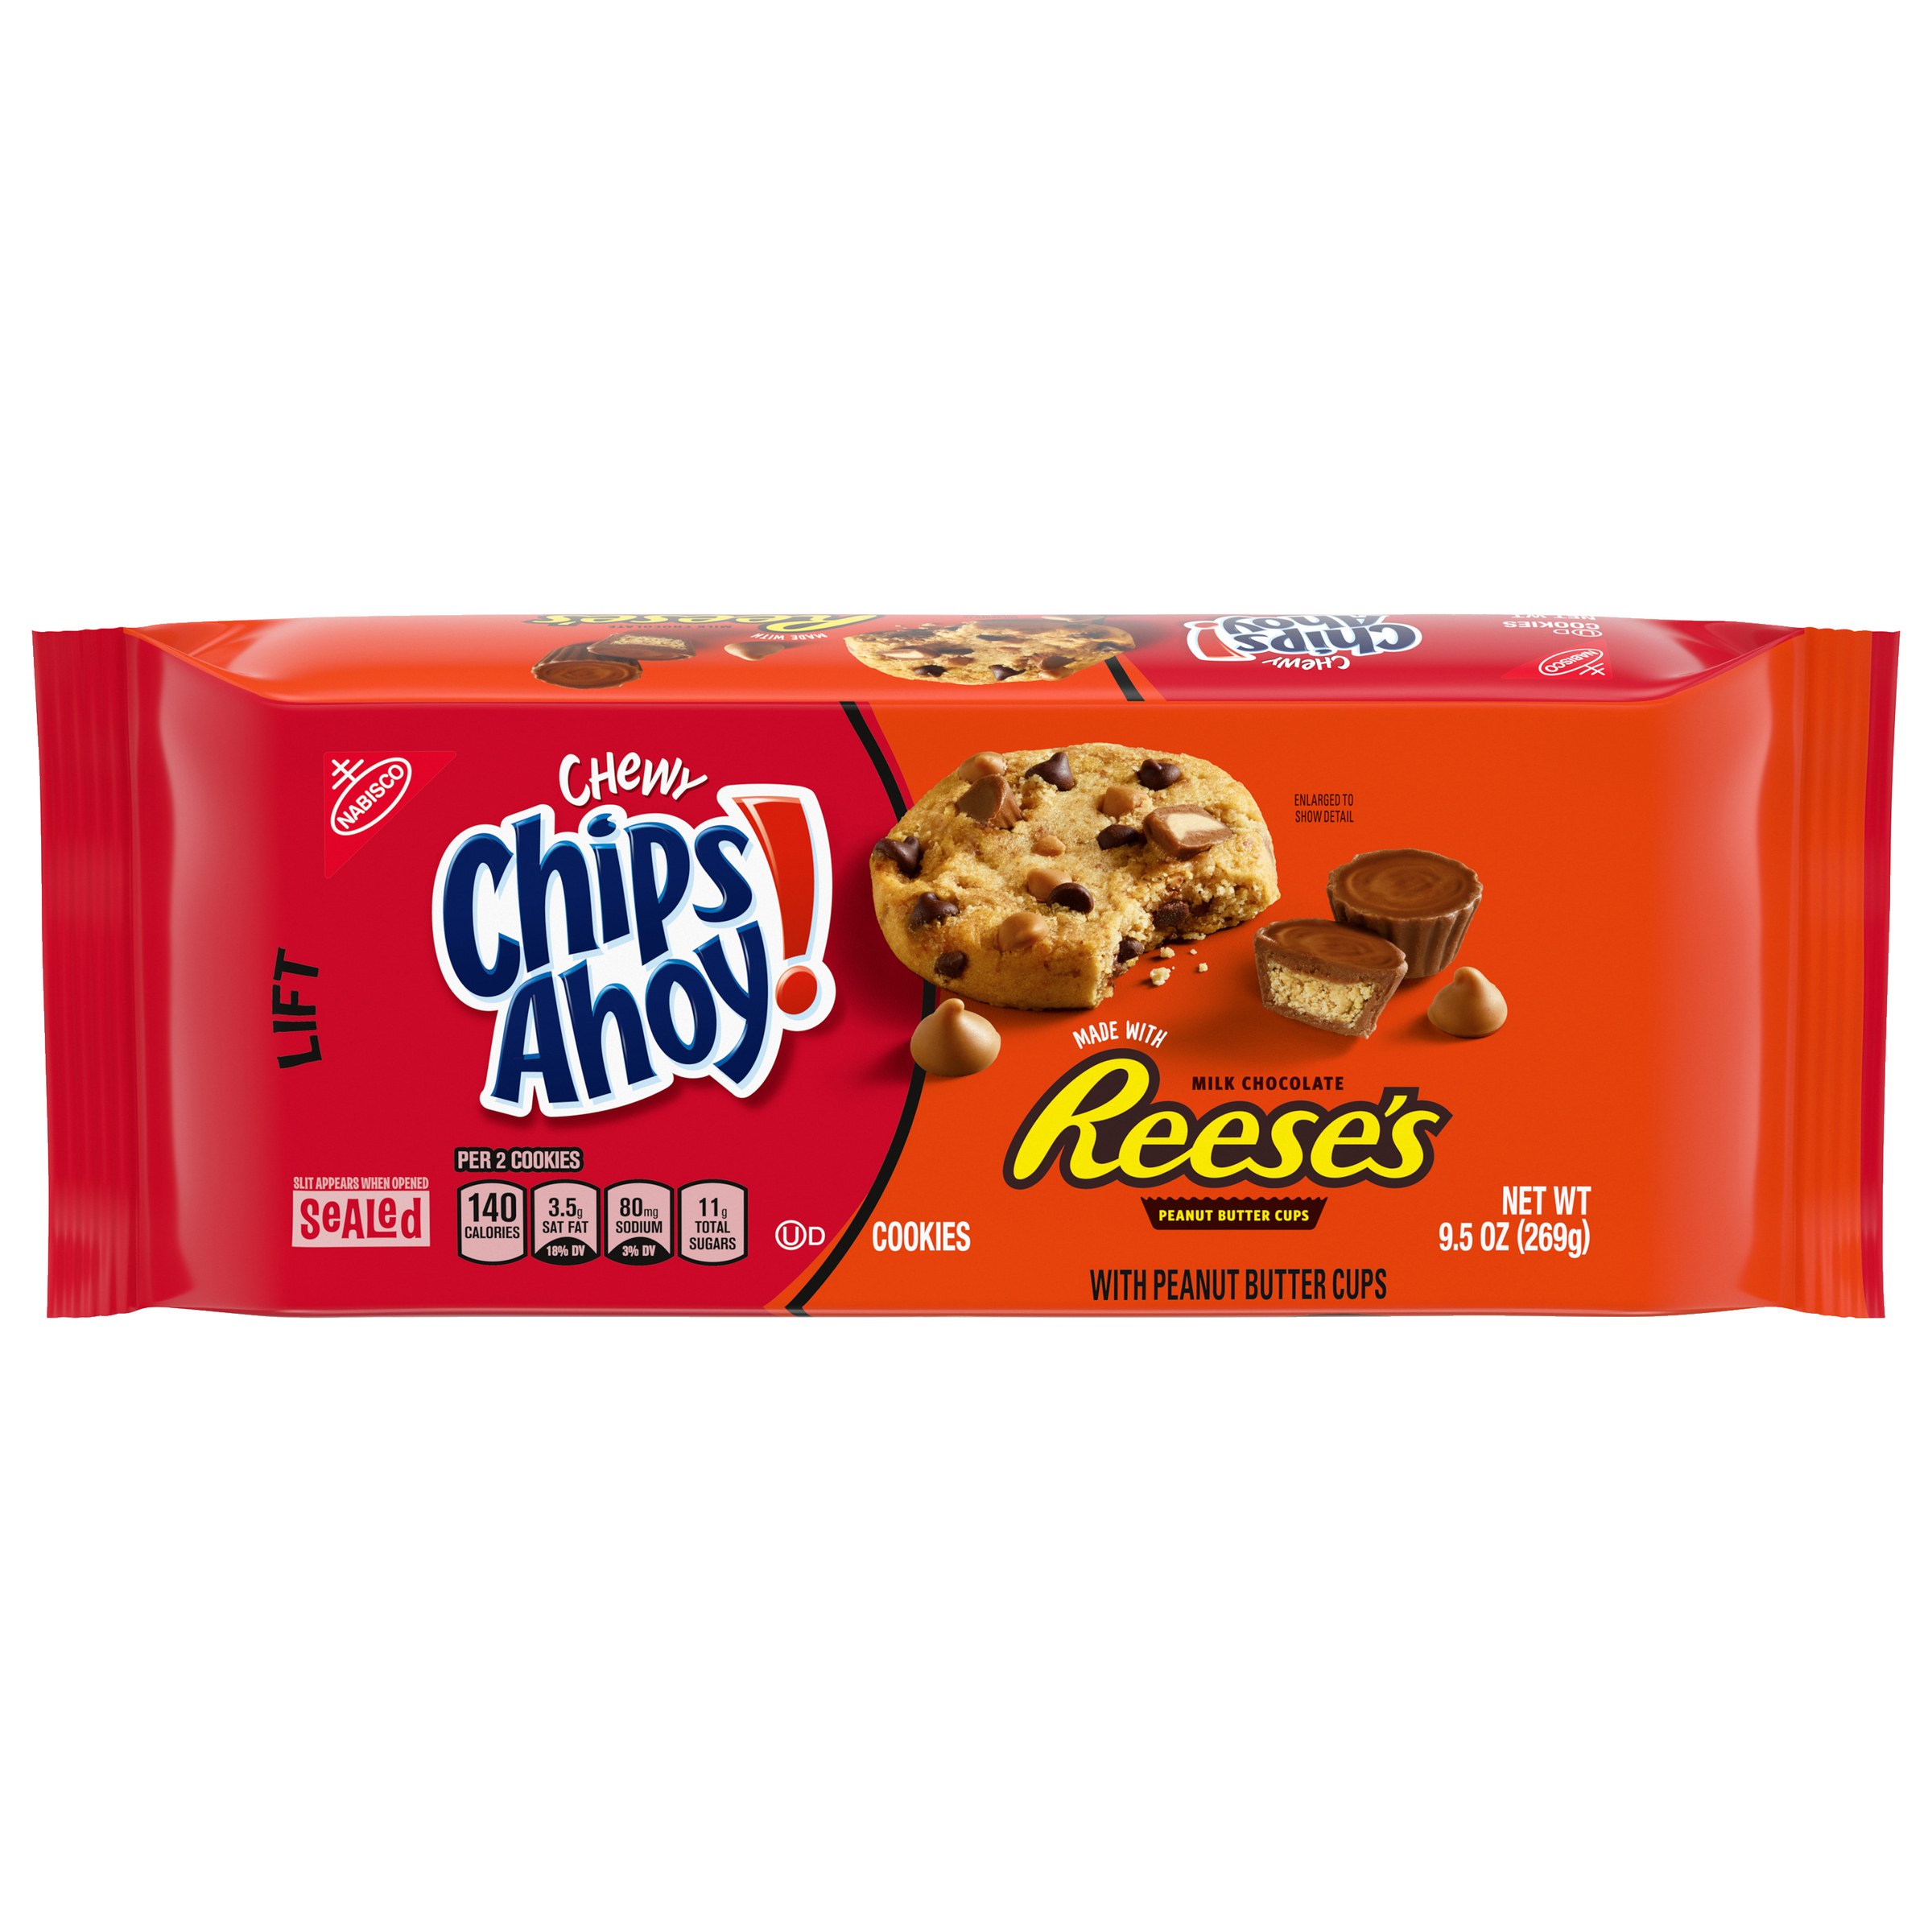 CHIPS AHOY! Chewy Chocolate Chip Cookies with Reese's Peanut Butter Cups, 9.5 oz-0